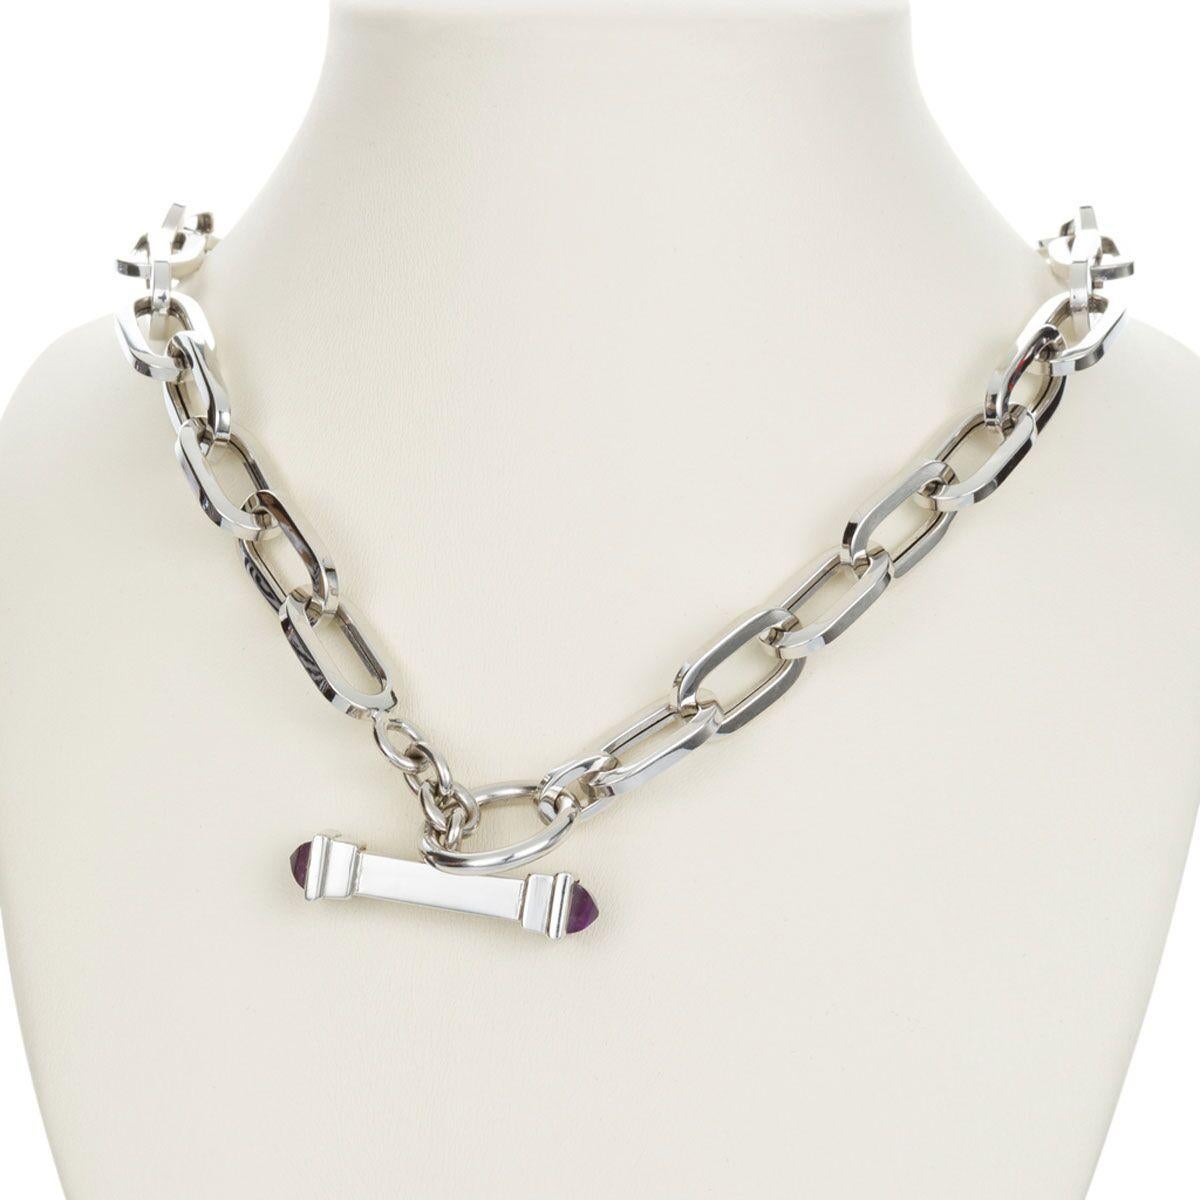 18 Karat White Gold Chain Link Necklace with Amethyst Toggle Clasp 2